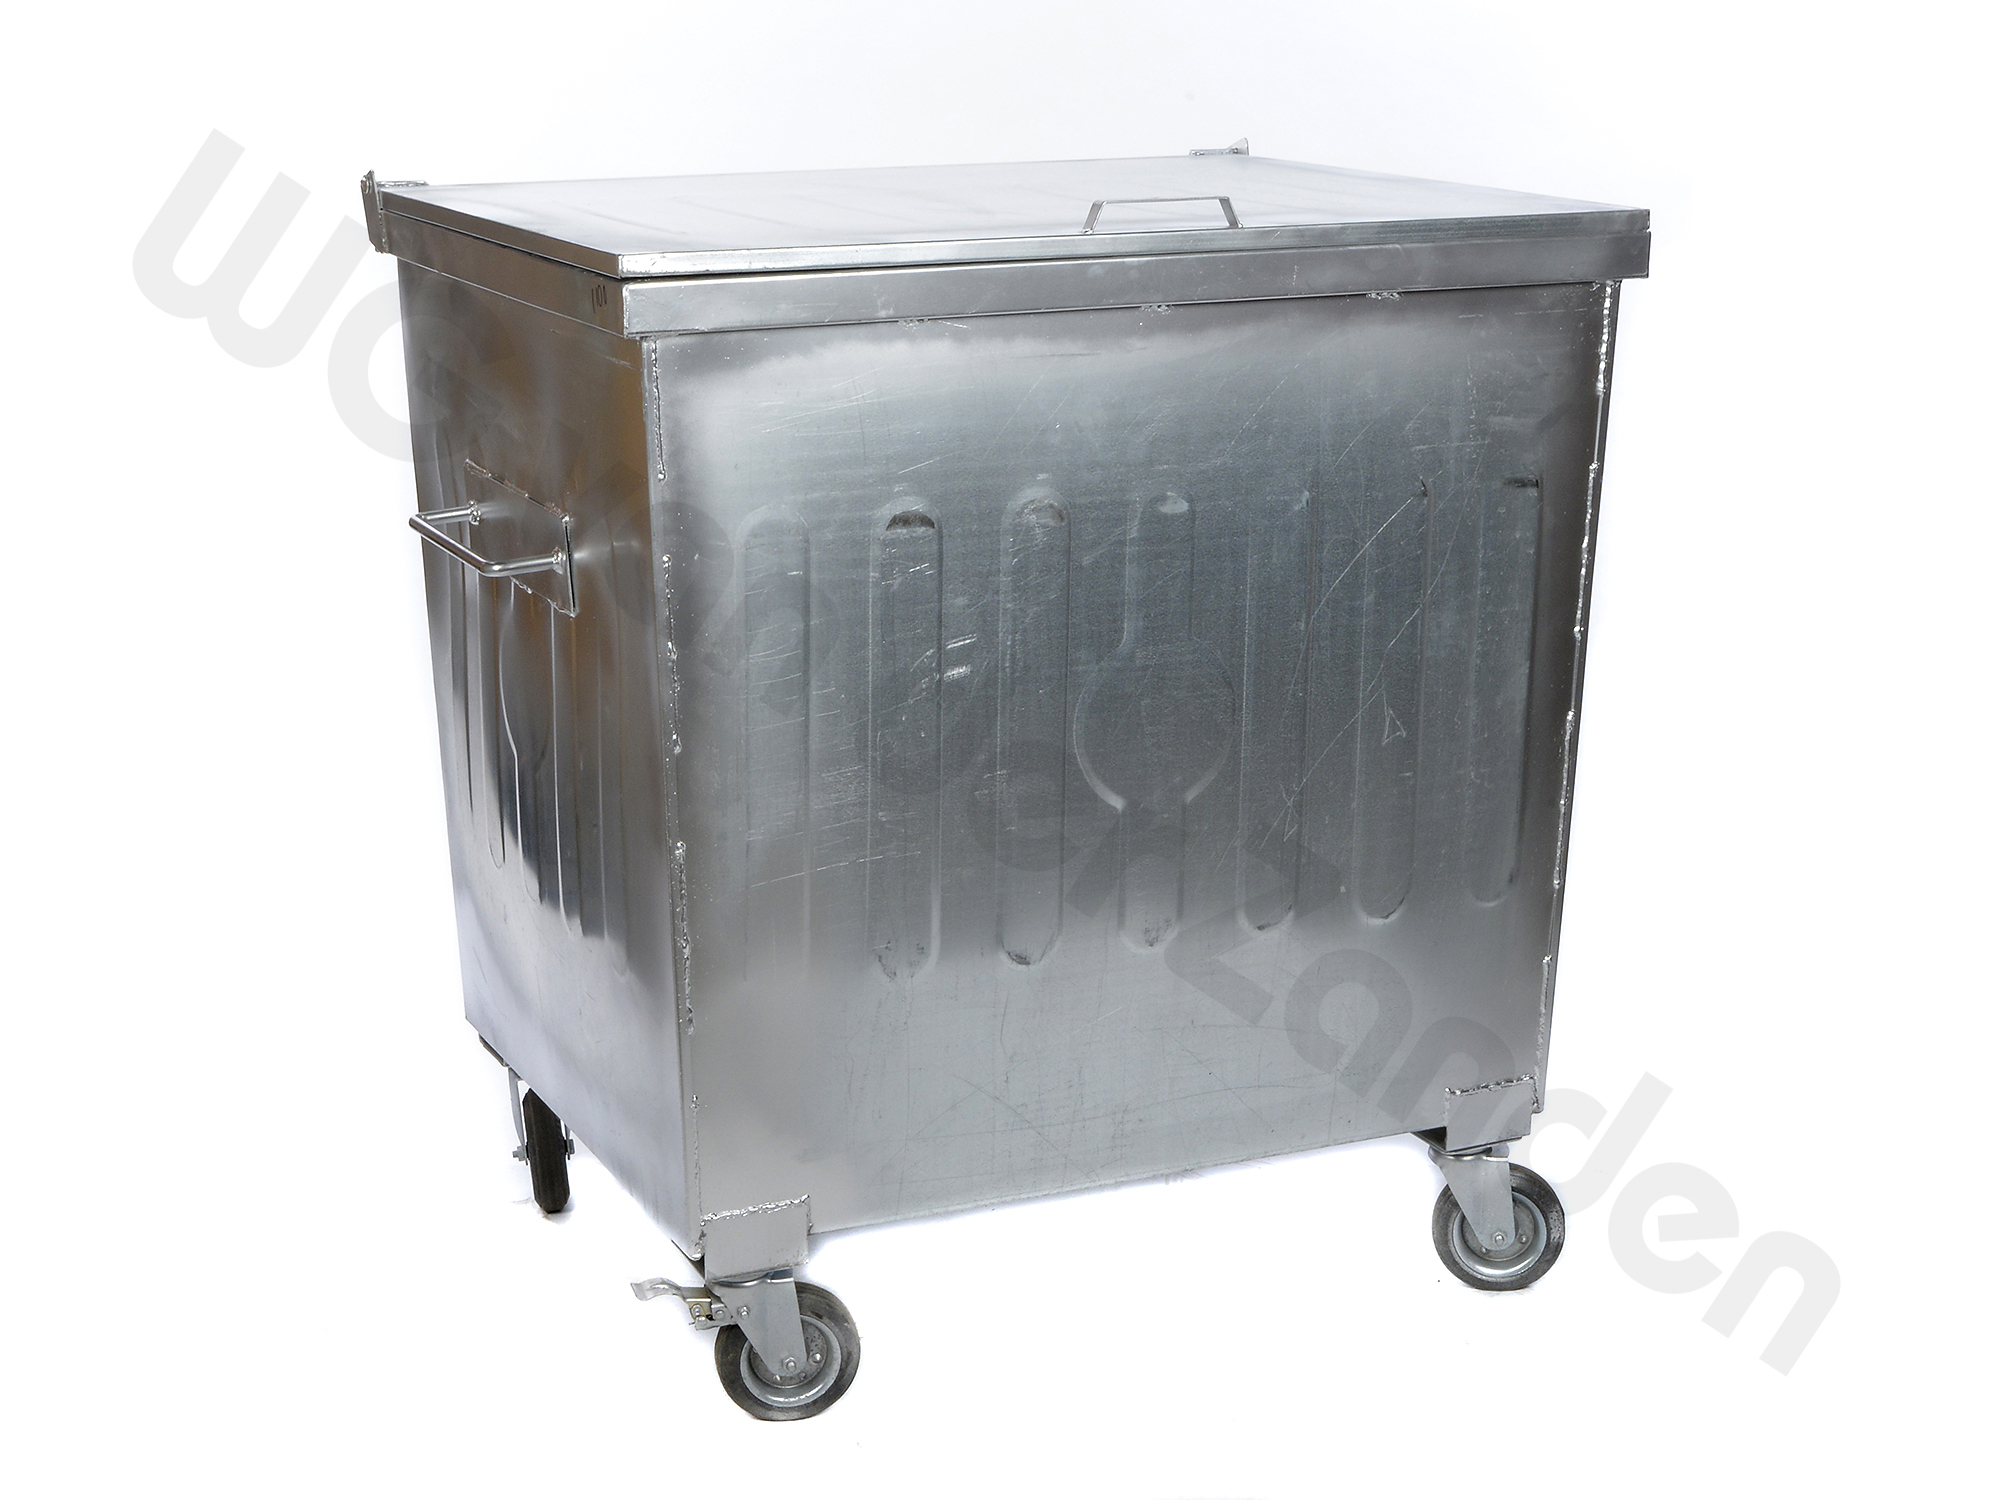 440456 GARBAGE CONTAINER 1100 LTR GALV. STEEL FLAT COVER WHEELED